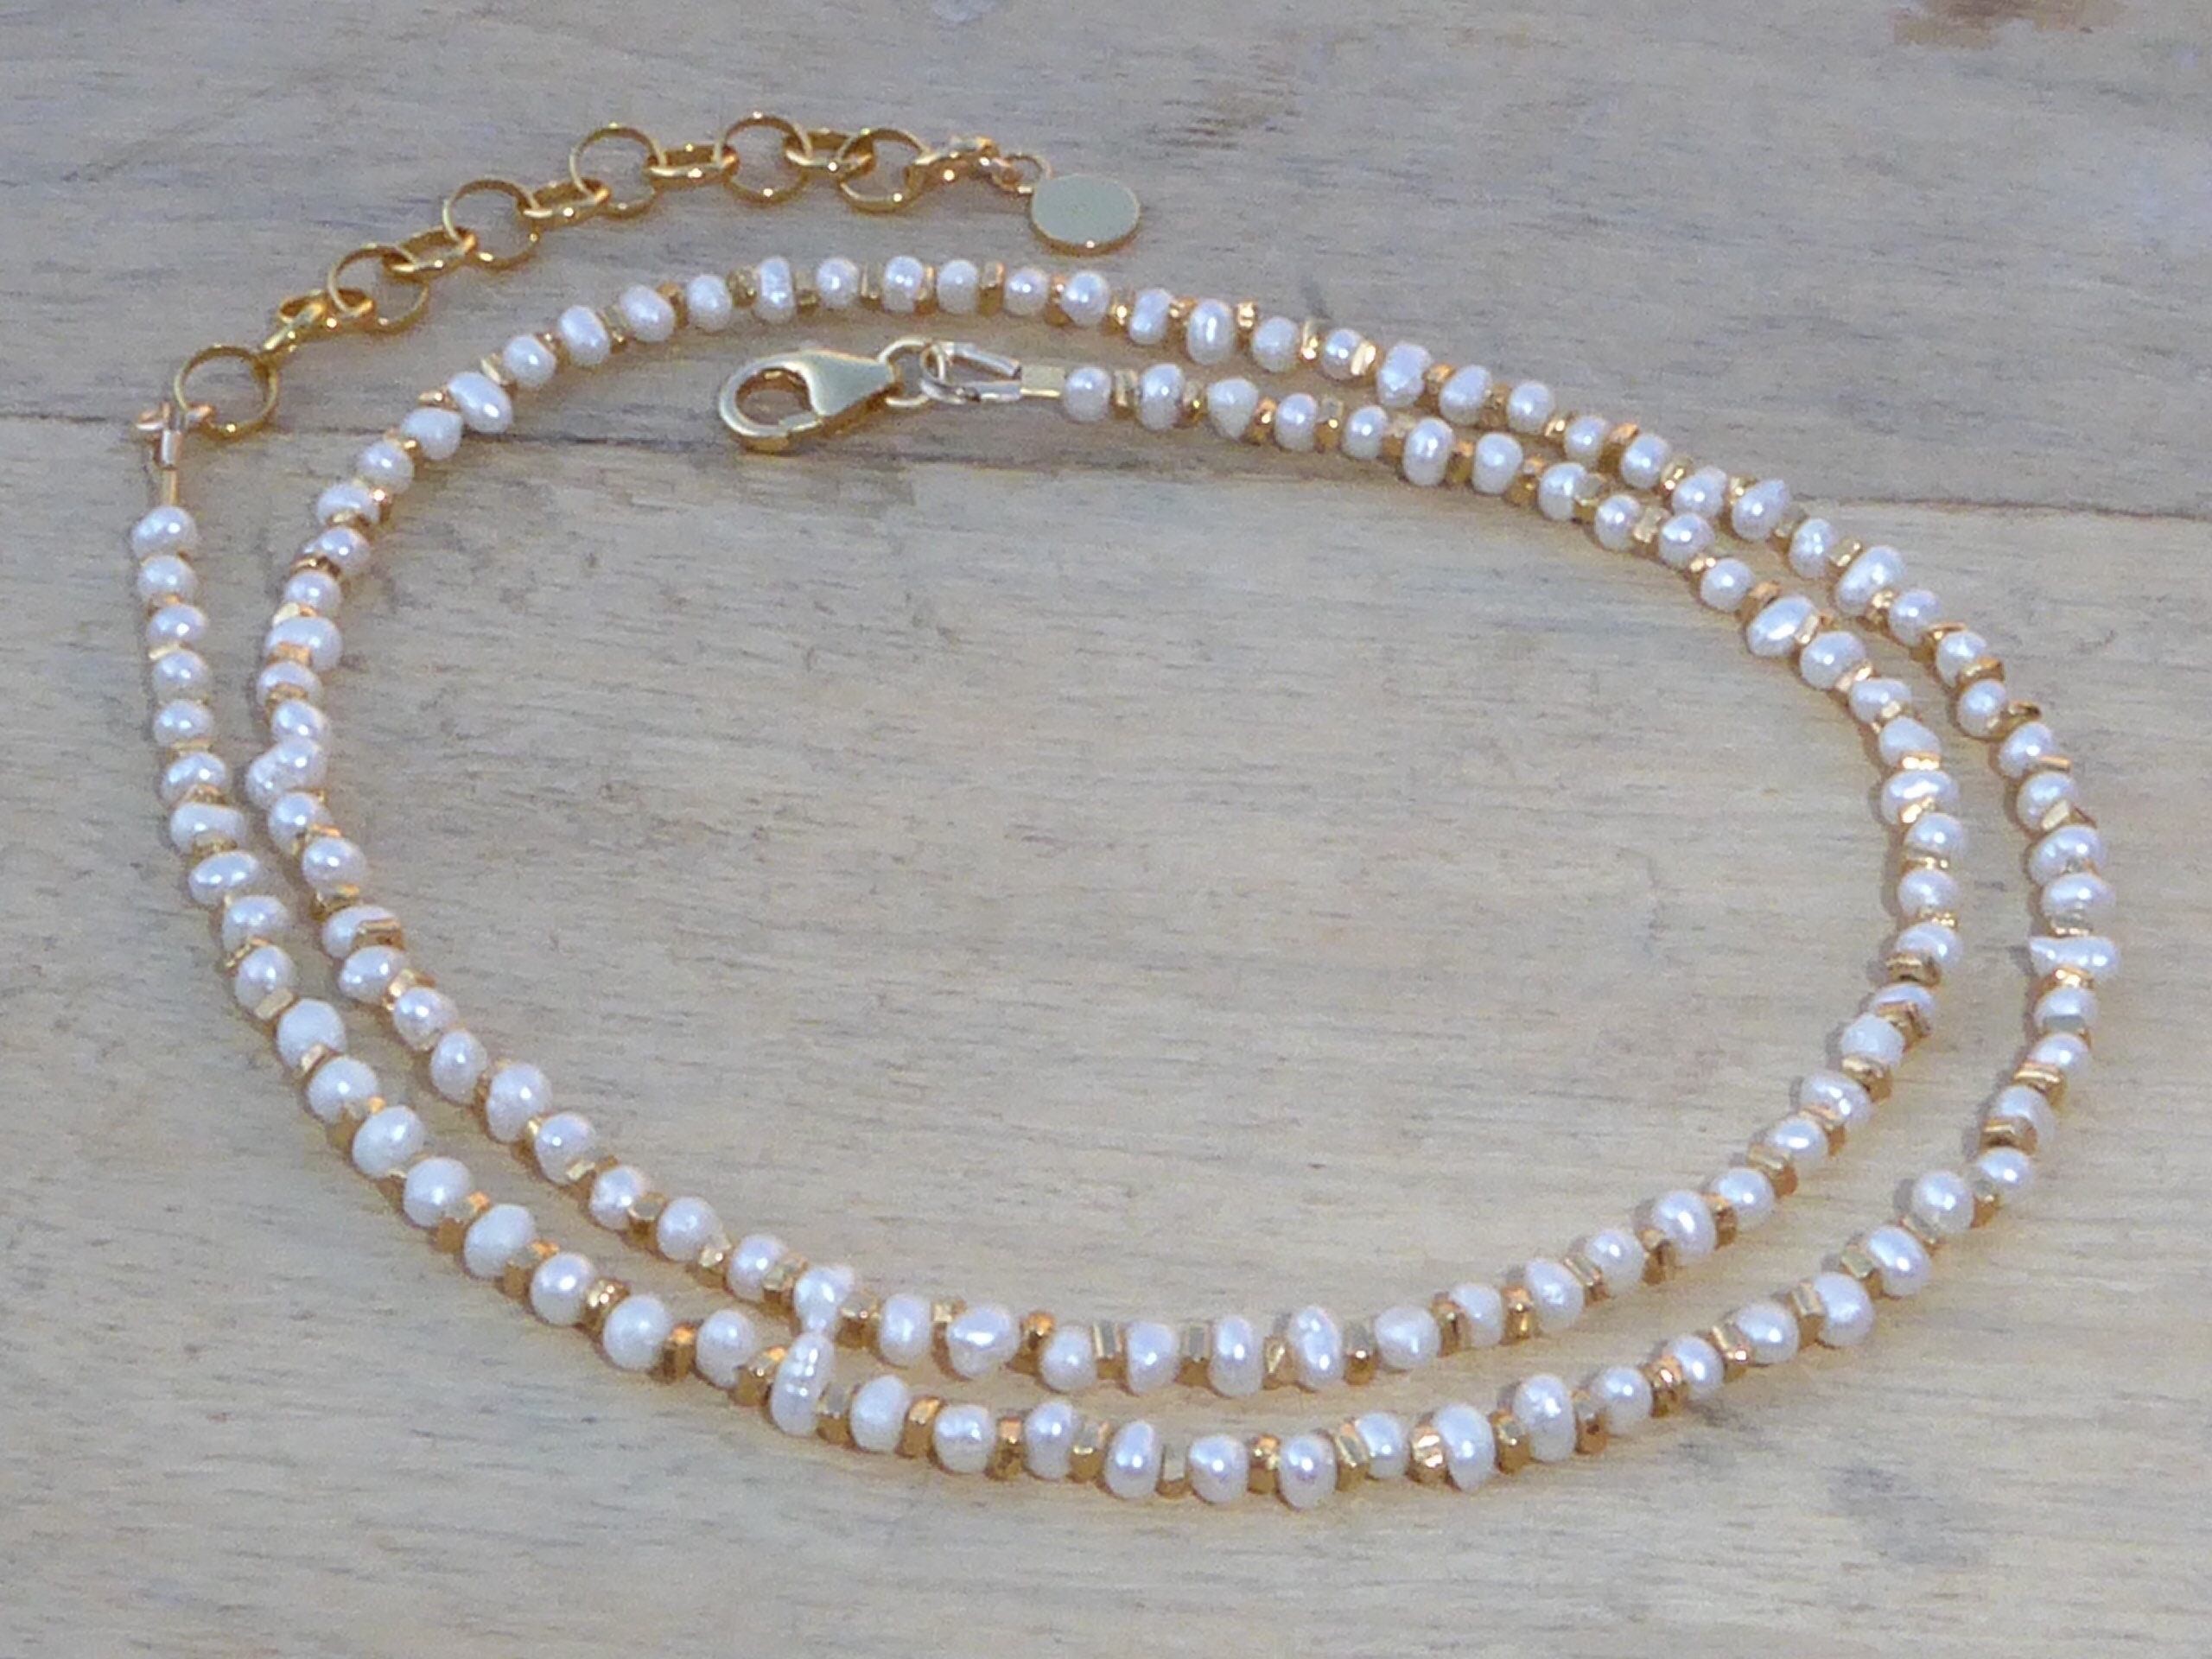 River Pearl and Vermeil Necklace, White Freshwater Pearl and Gold Choker,  Fine Small Stone Necklace - Etsy